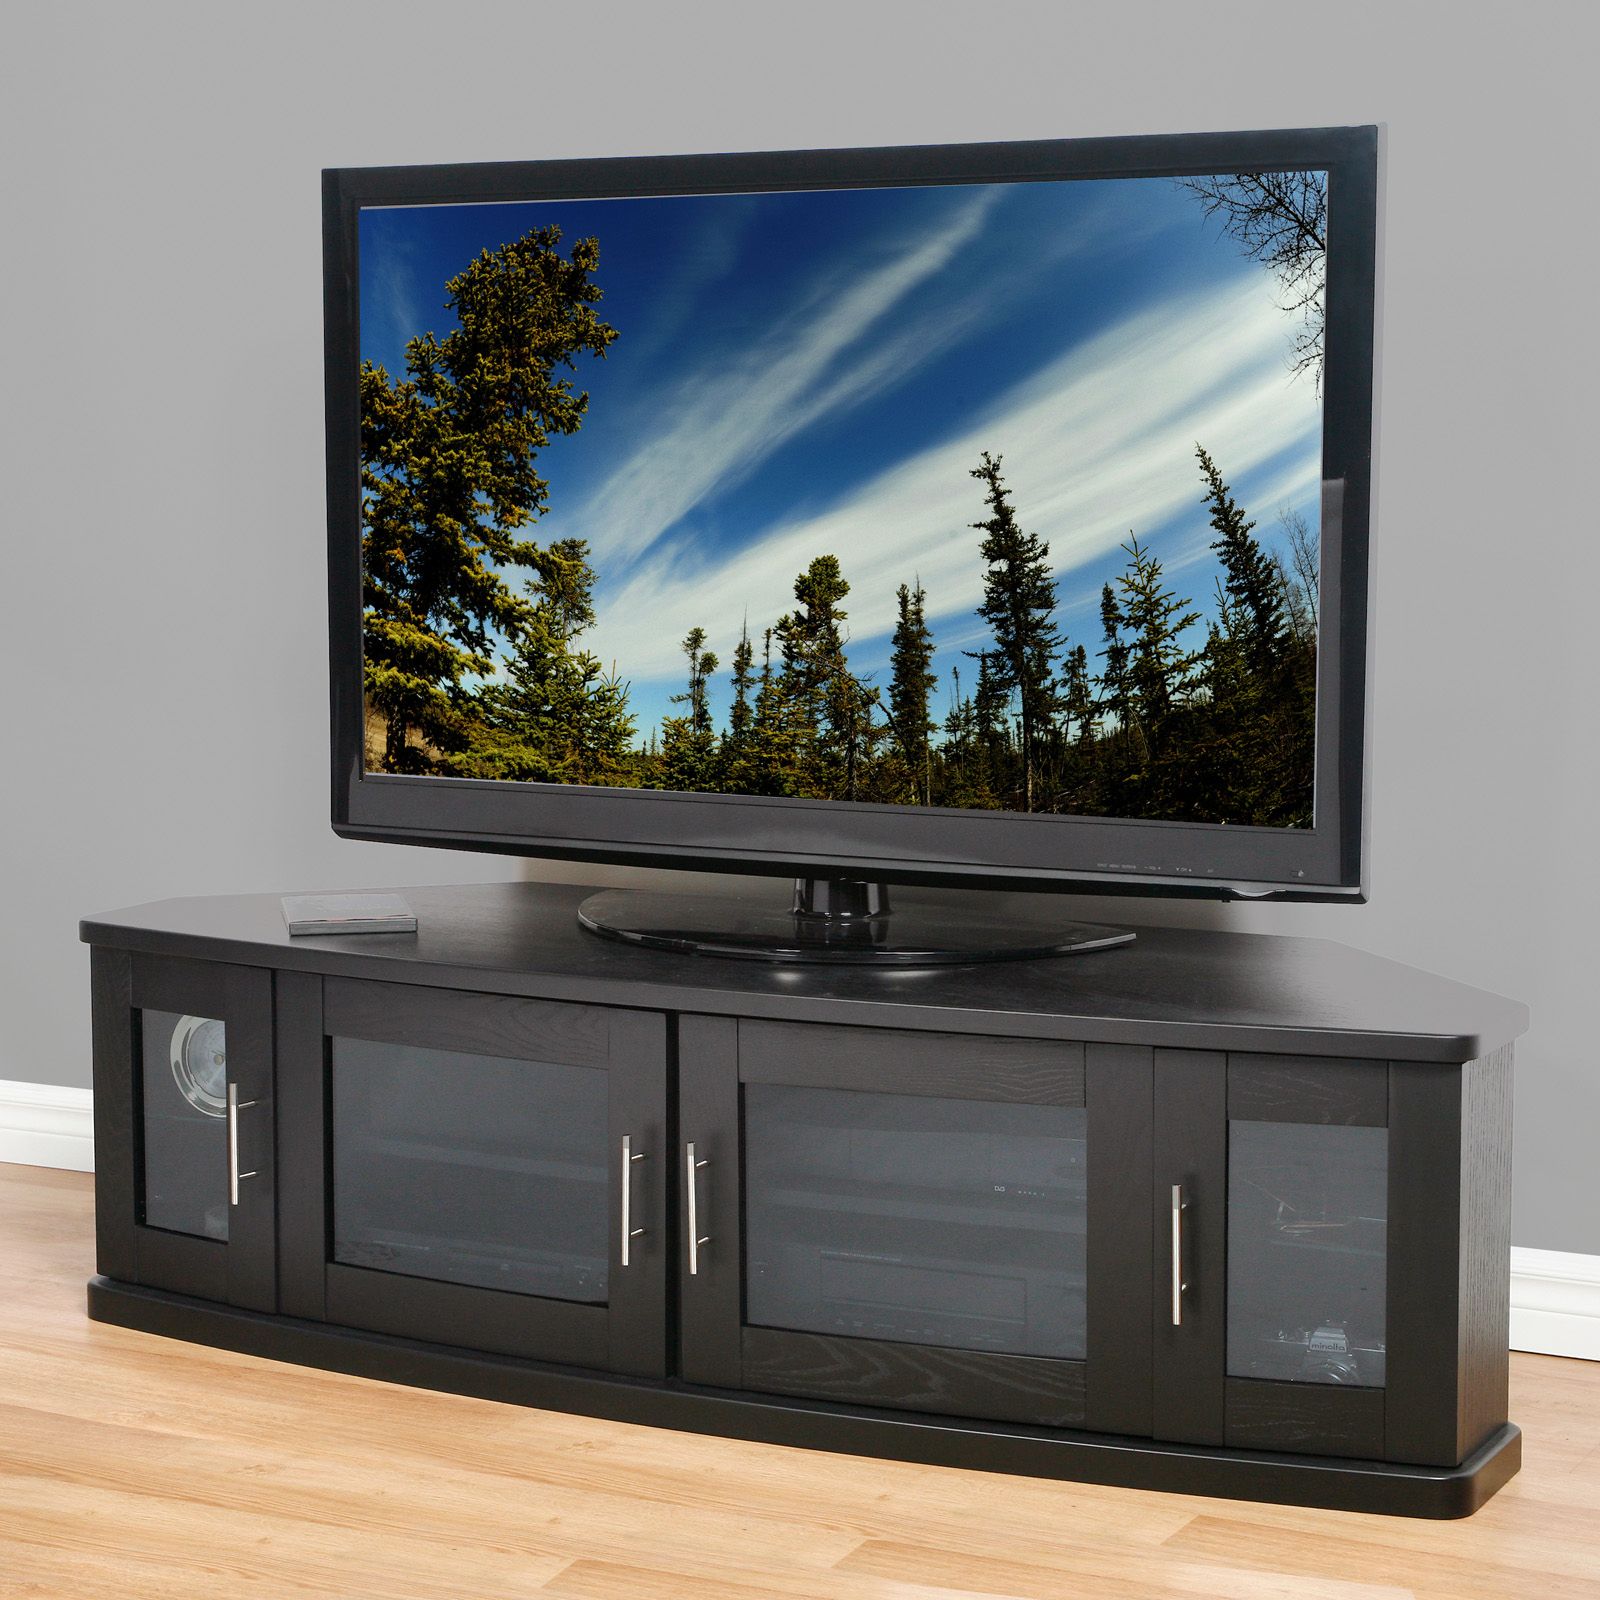 Plateau Newport 62 Inch Corner Tv Stand In Black – Tv Regarding Long Wood Tv Stands (View 2 of 15)